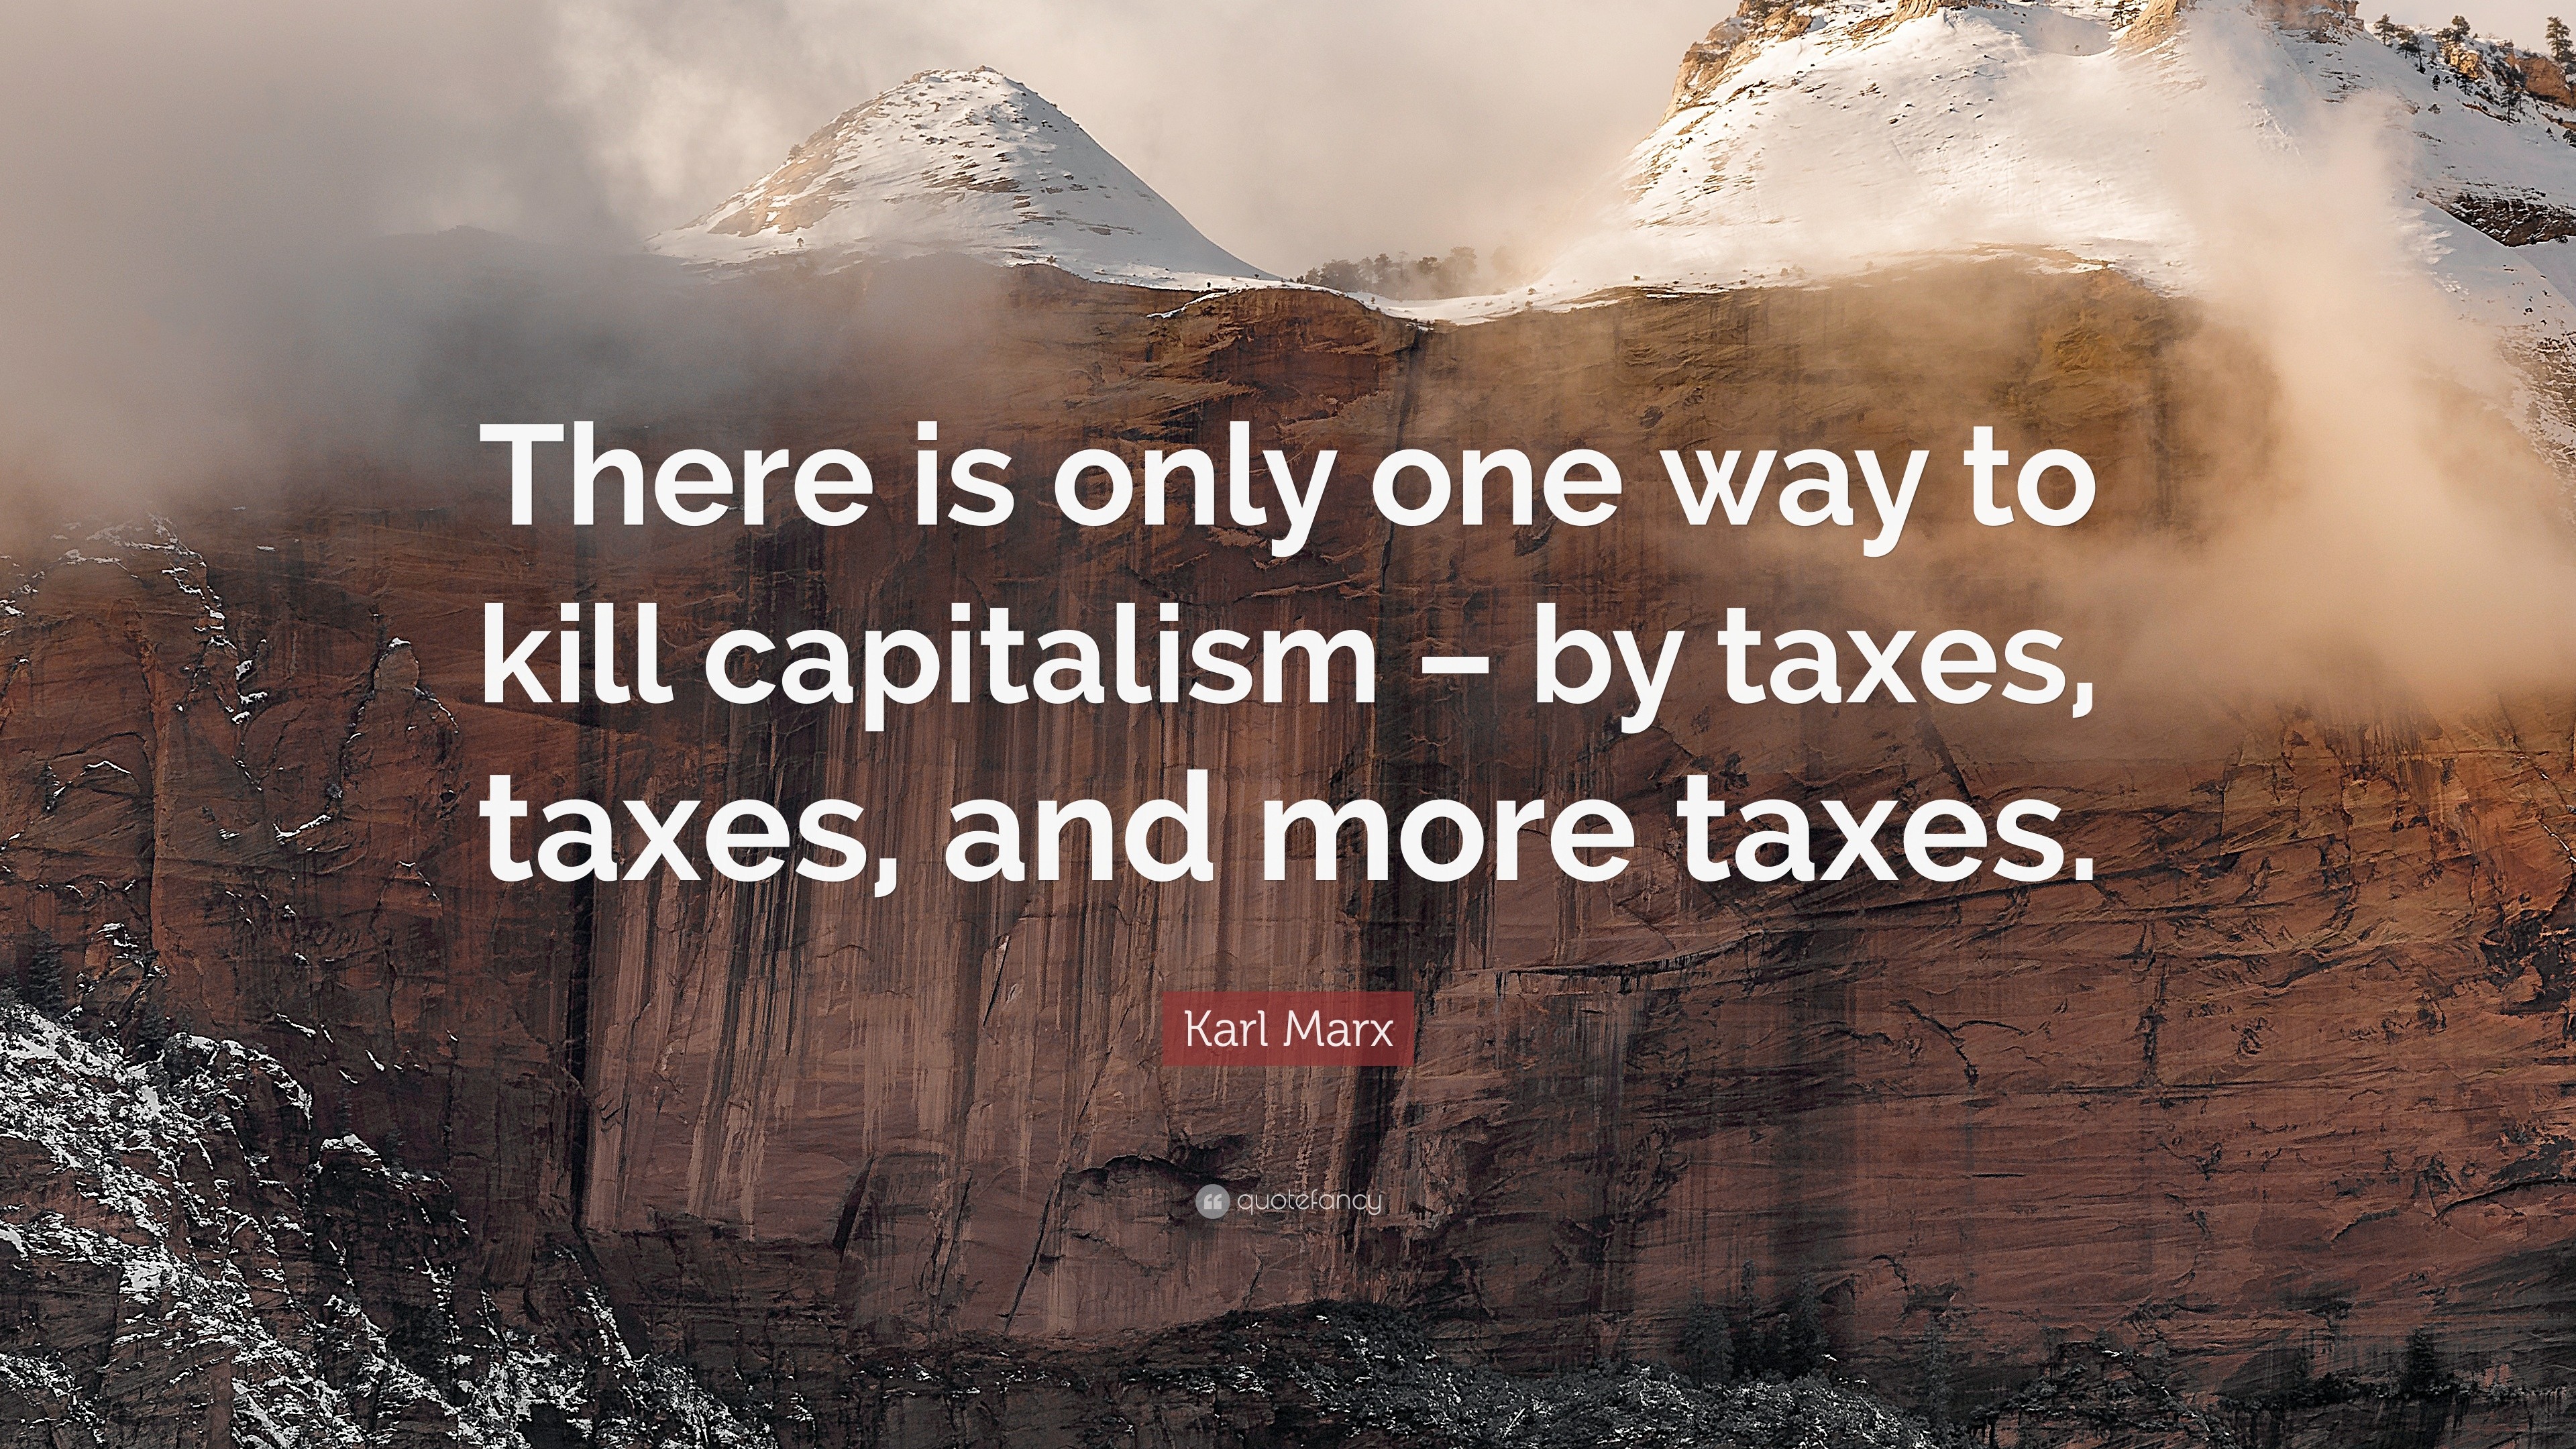 Karl Marx Quote There Is Only One Way To Kill Capitalism By Taxes Taxes And More Taxes 10 Wallpapers Quotefancy